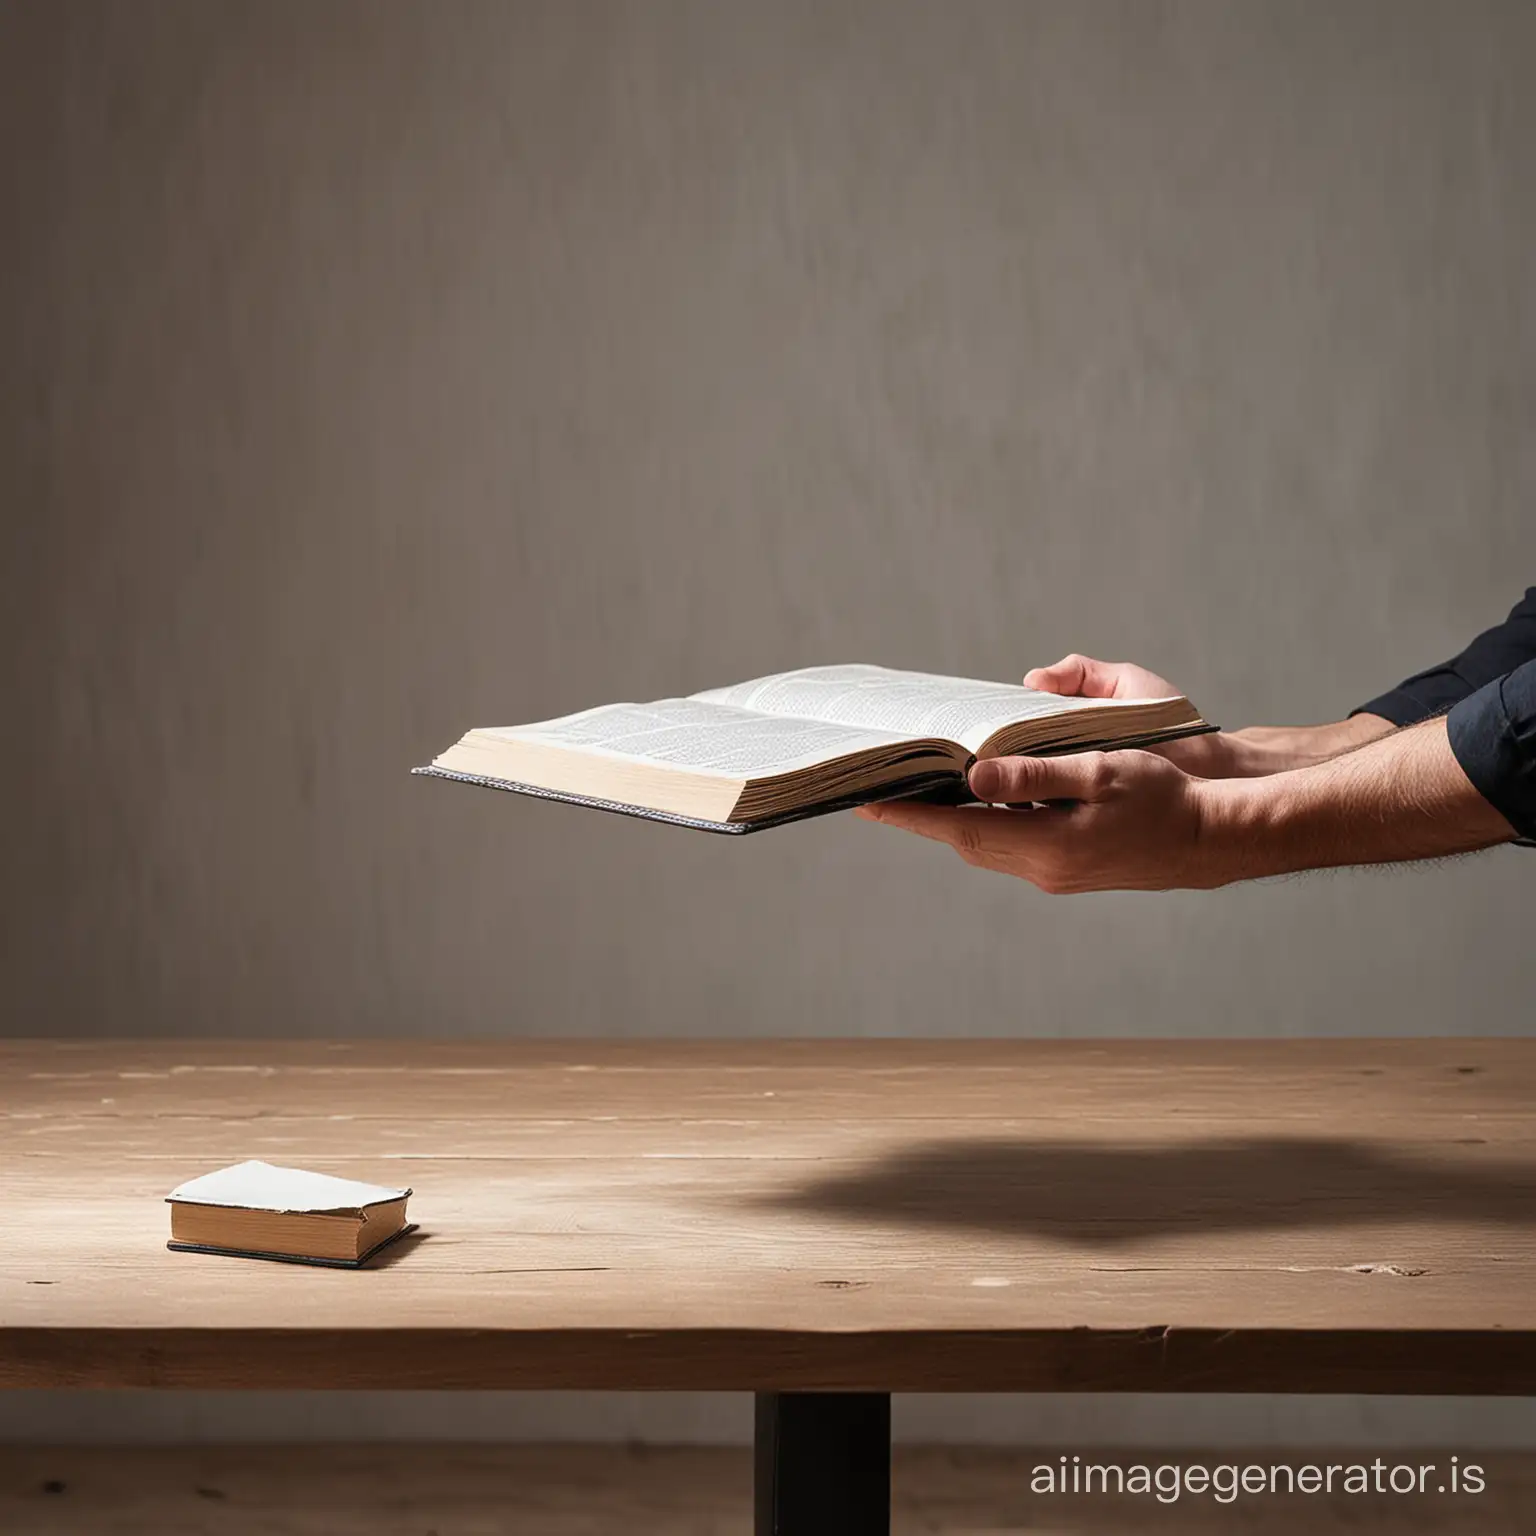 Man-Placing-a-Book-on-Tabletop